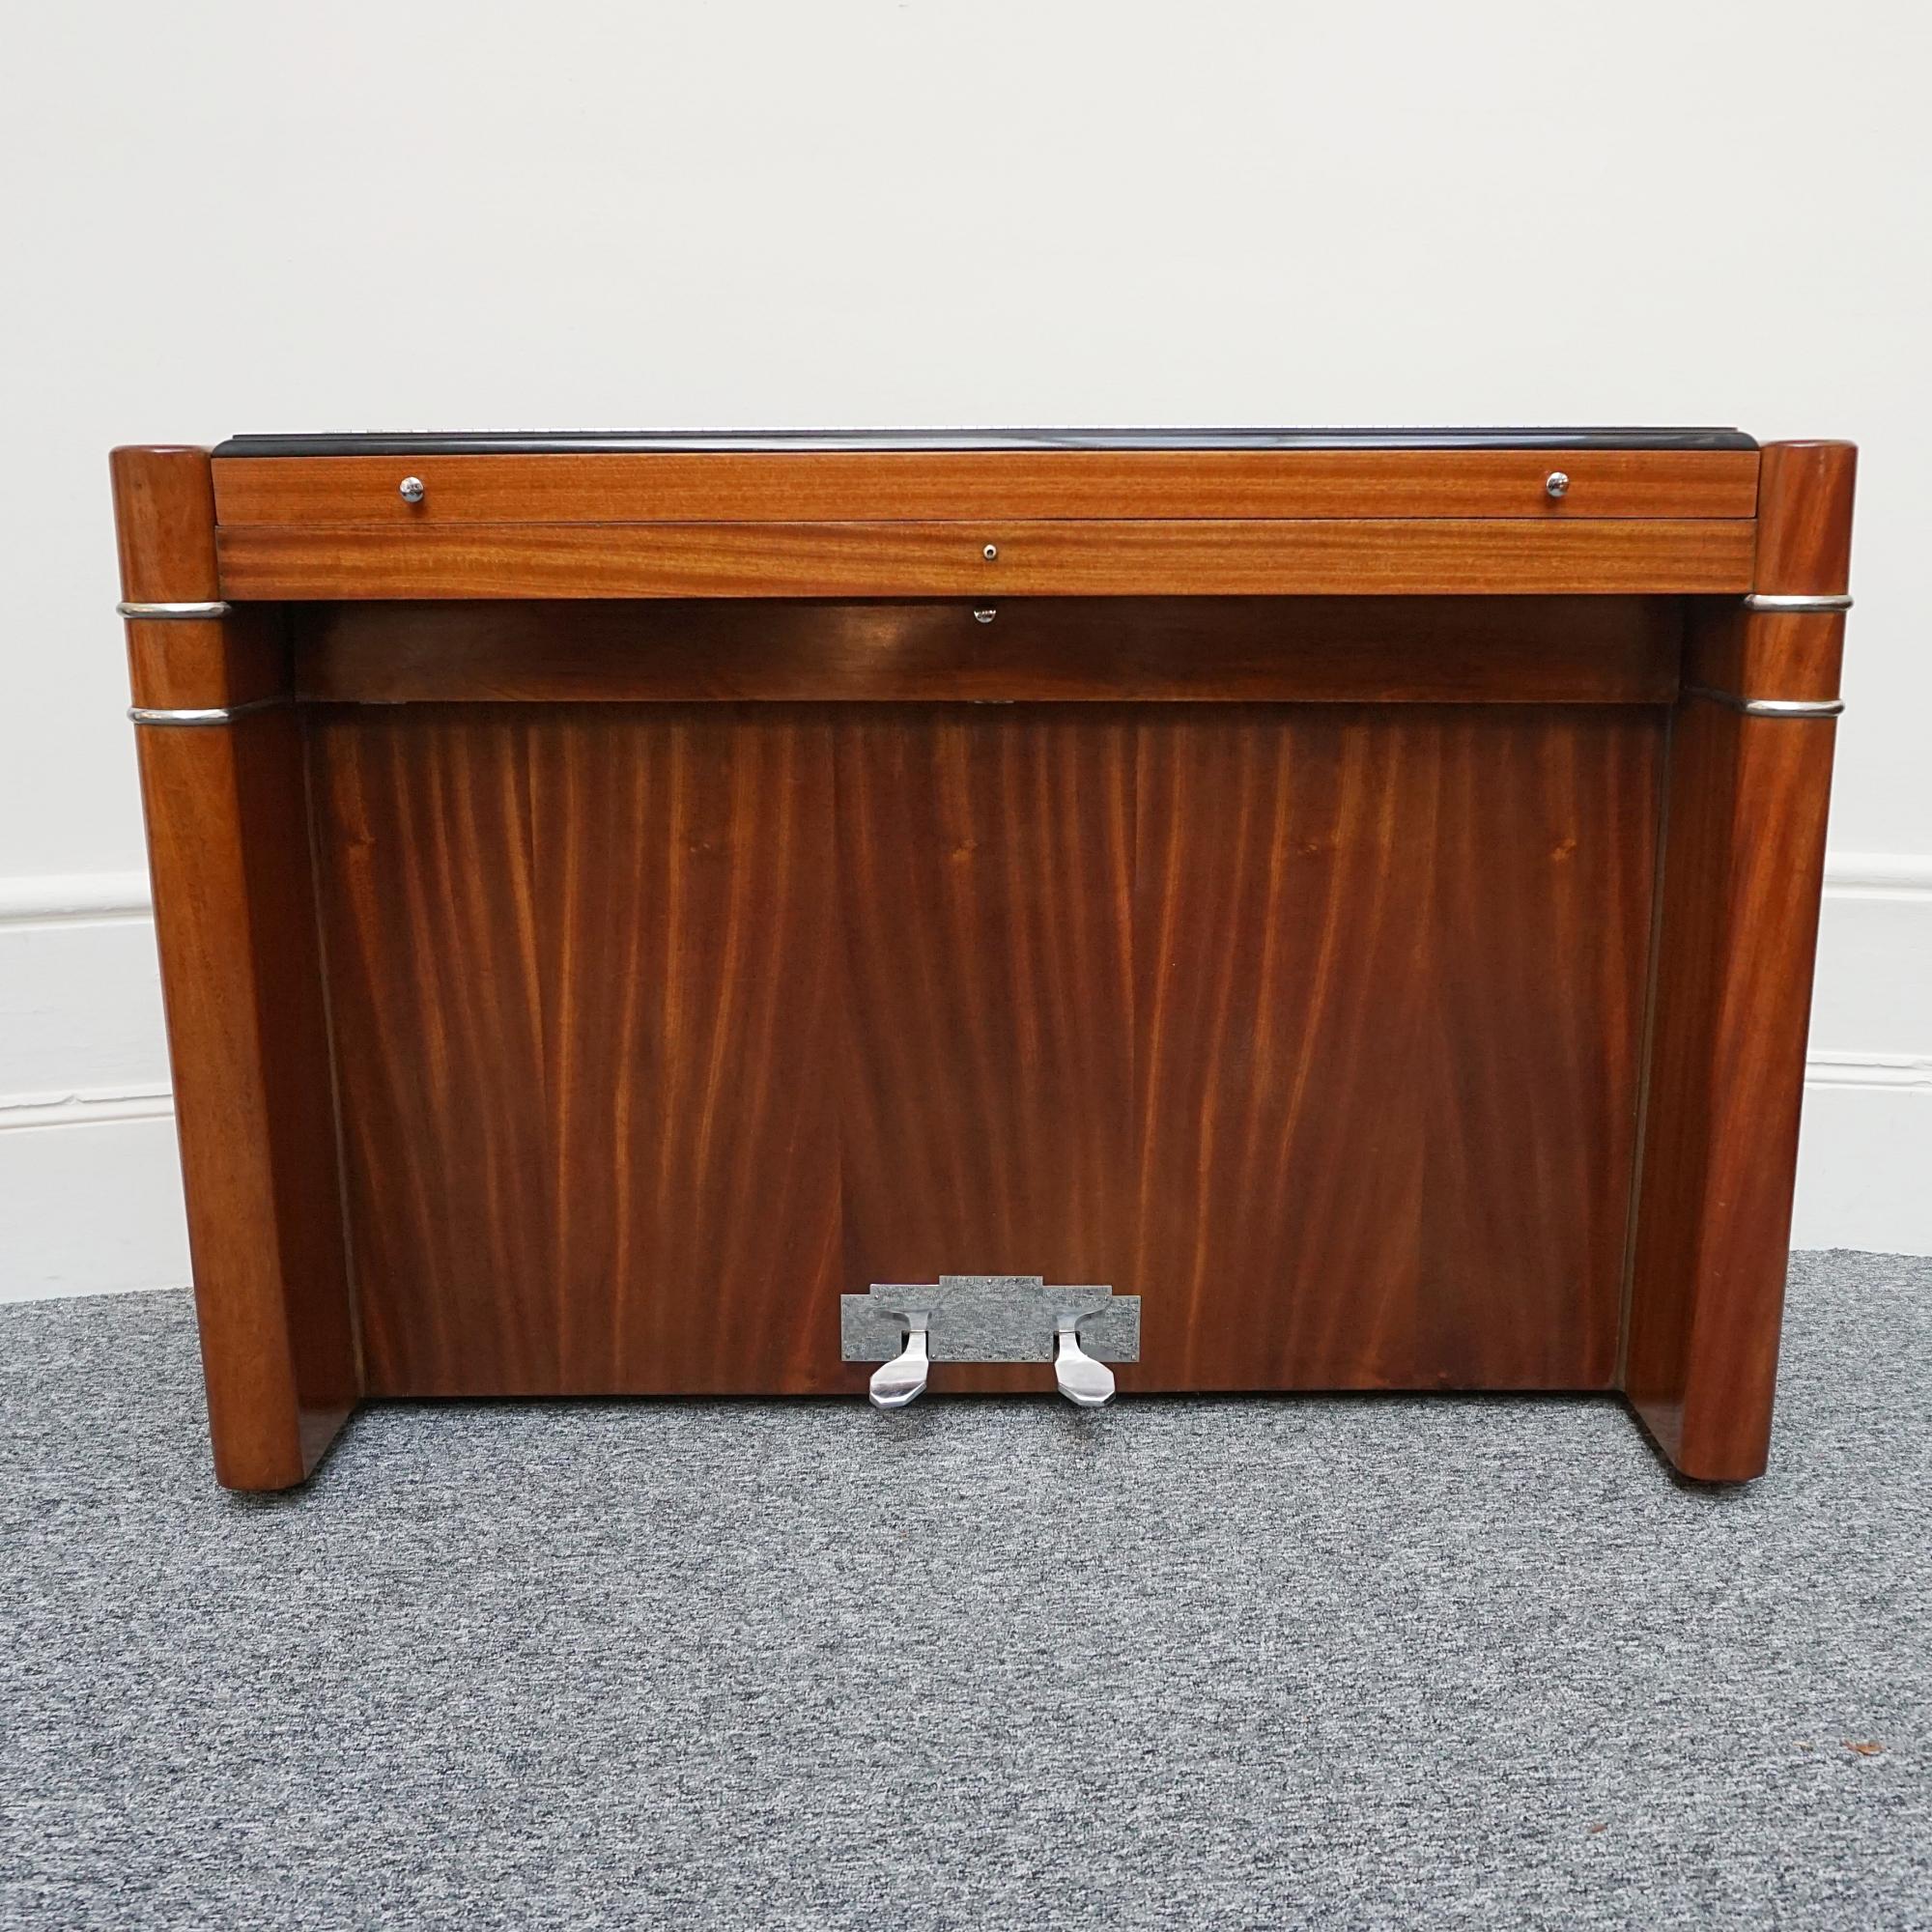 AN Art Deco mini 'Pianette' and stool by Eavestaff. Veneered walnut throughout with ebonised banding. Stool with integral sheet music compartment.

Dimensions: H 81cm W 130cm D 46cm

Origin: English

Date; Circa 1935

Item Number: 27102314

All of